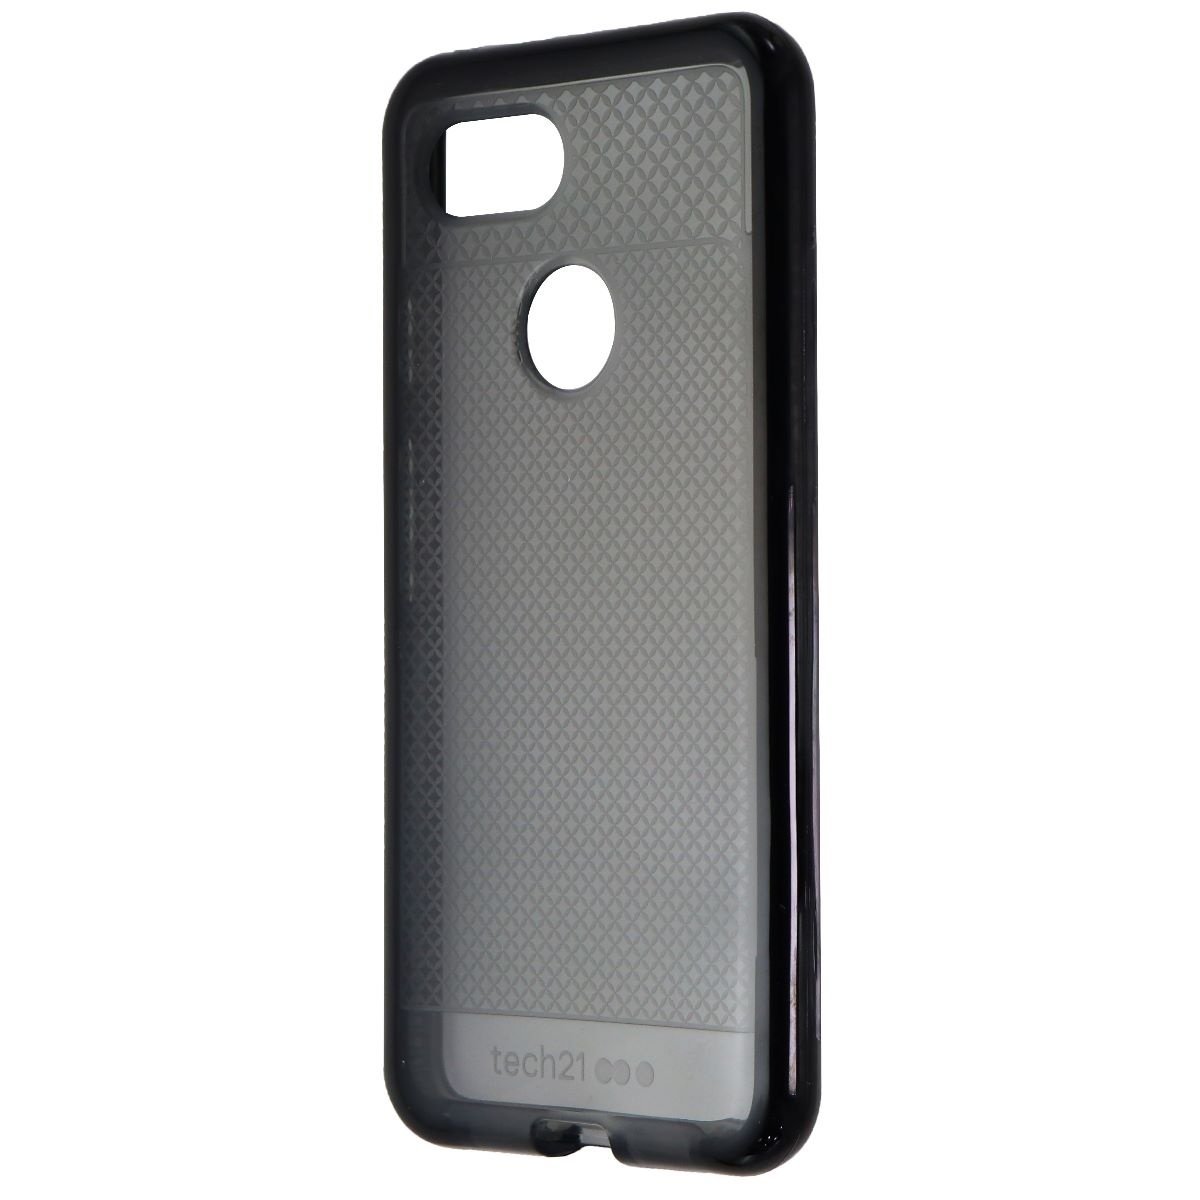 Tech 21 T21-6256 Evo Fitted Soft Shell Case For Google Pixel 3 - Smokey/Black